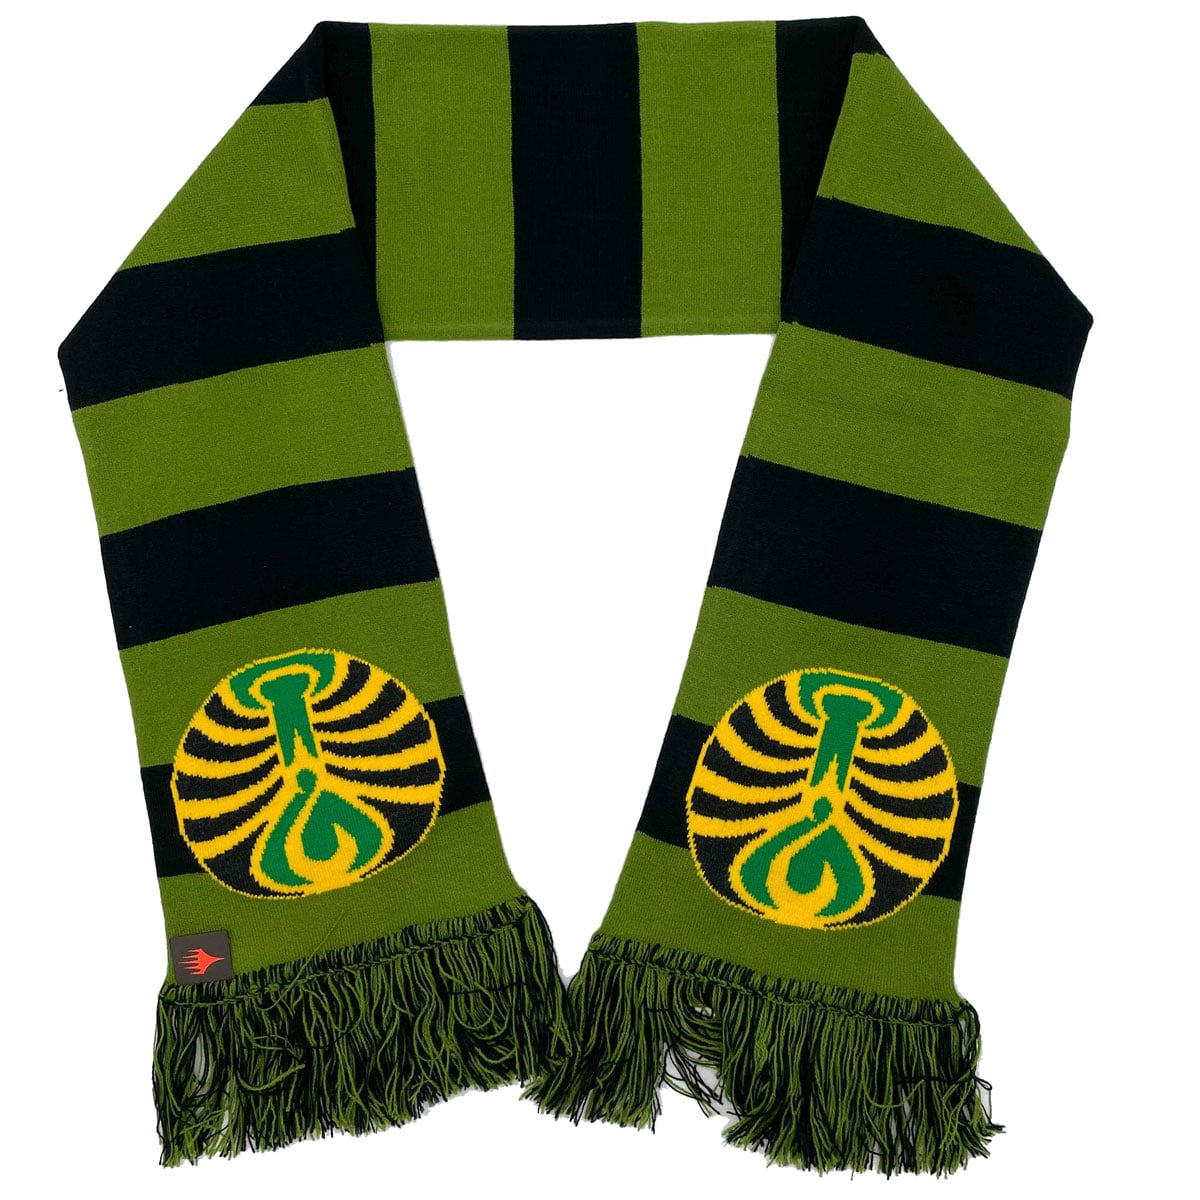 Strixhaven College Scarf for Magic: The Gathering